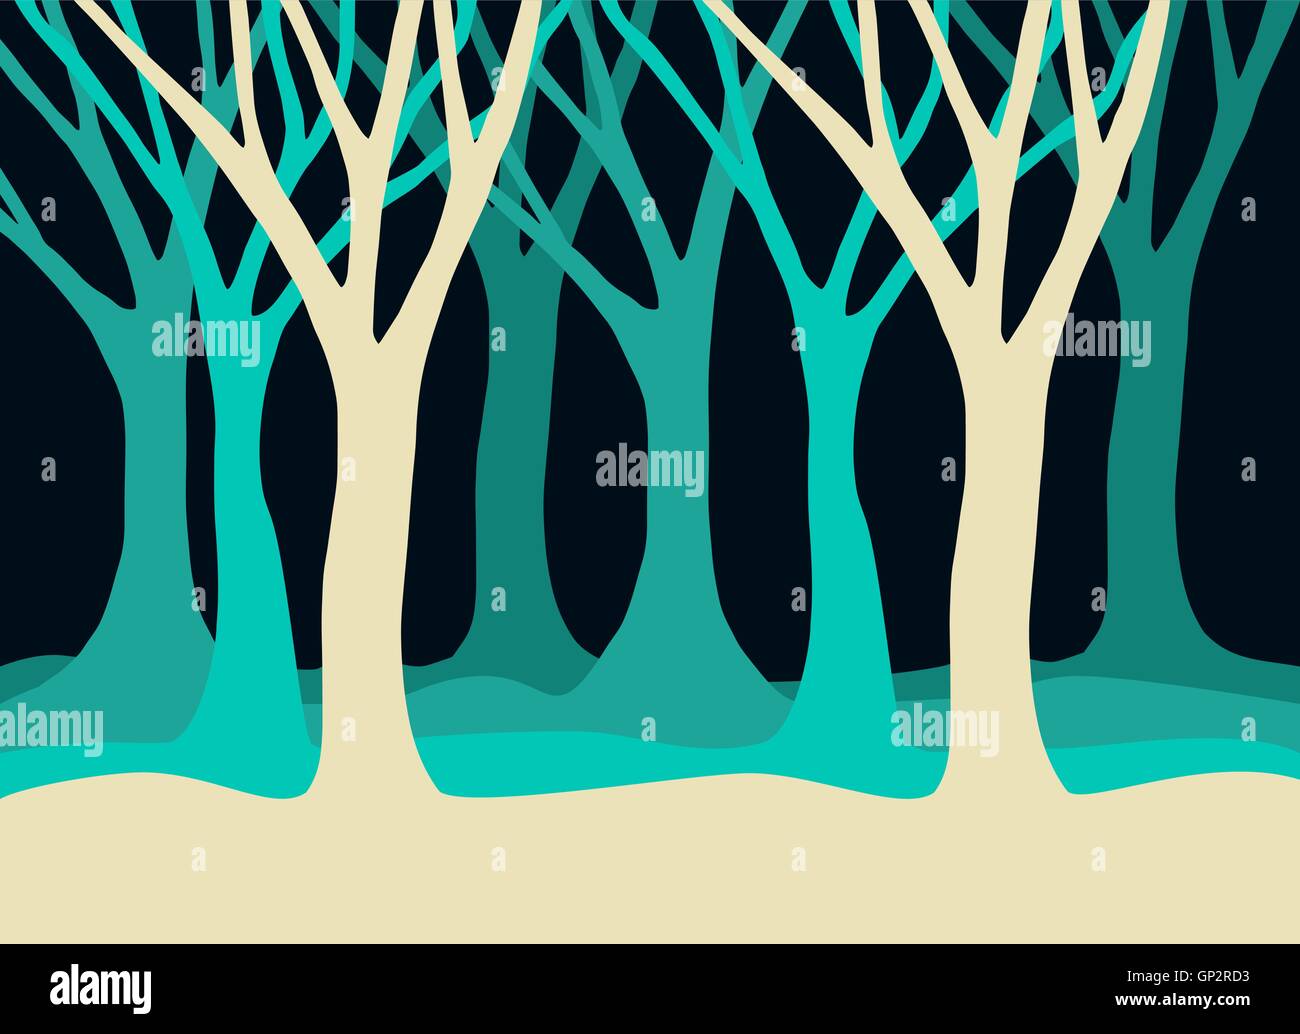 Concept forest illustration with empty tree silhouettes in blue colors for environment or nature design. EPS10 vector. Stock Vector